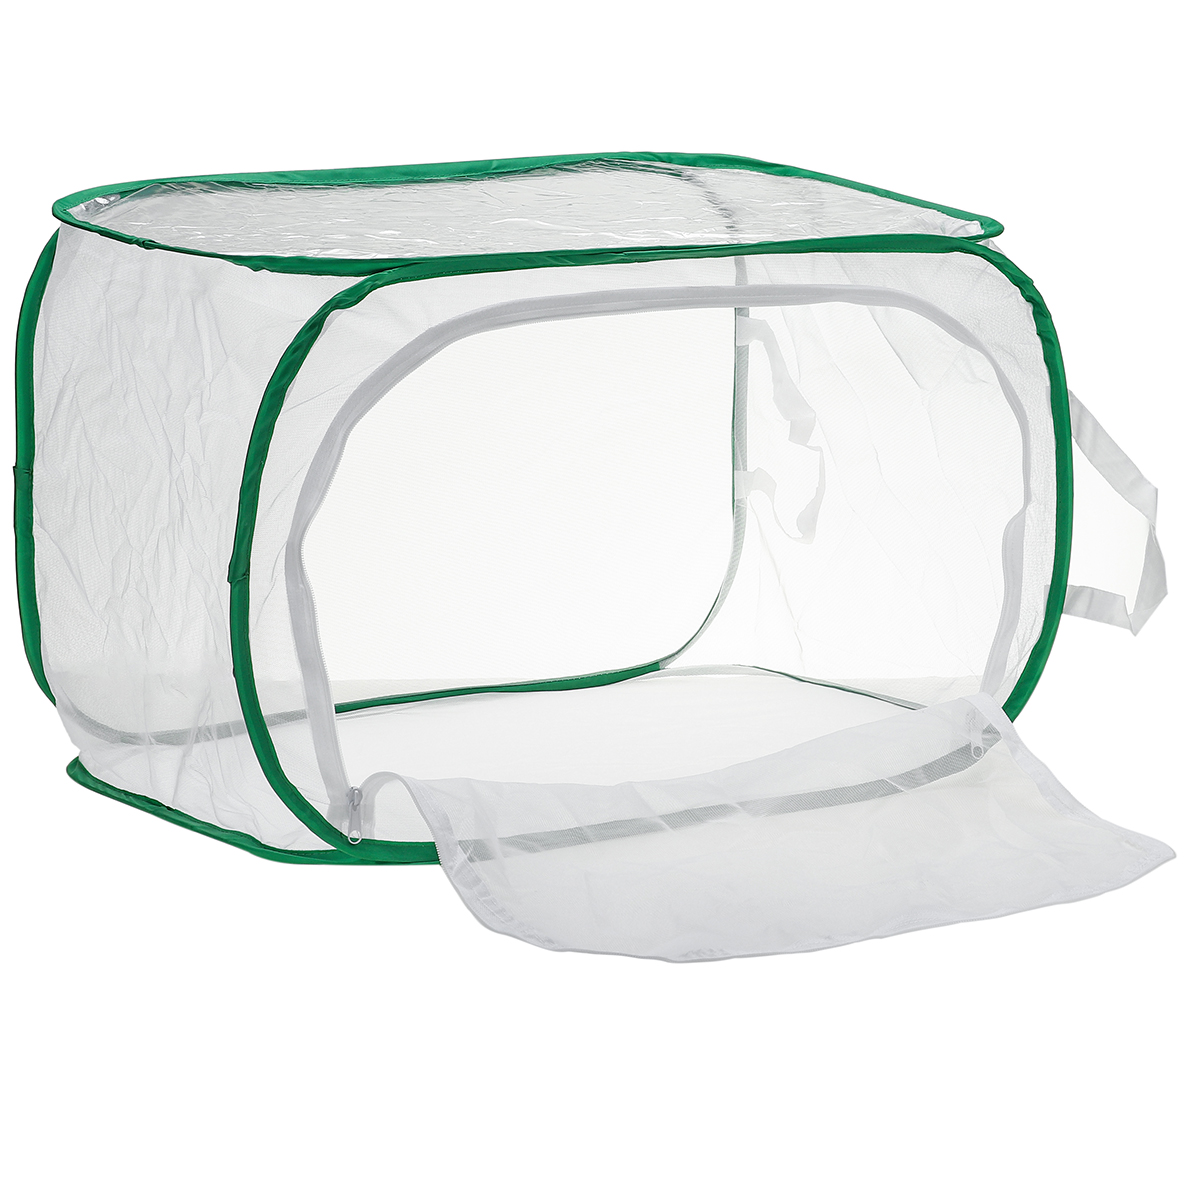 Green-Collapsible-Insect-Habitat-Cage-Butterfly-Mesh-Transparent-Surface-Portable-Zipper-Cage-Plant--1688452-7